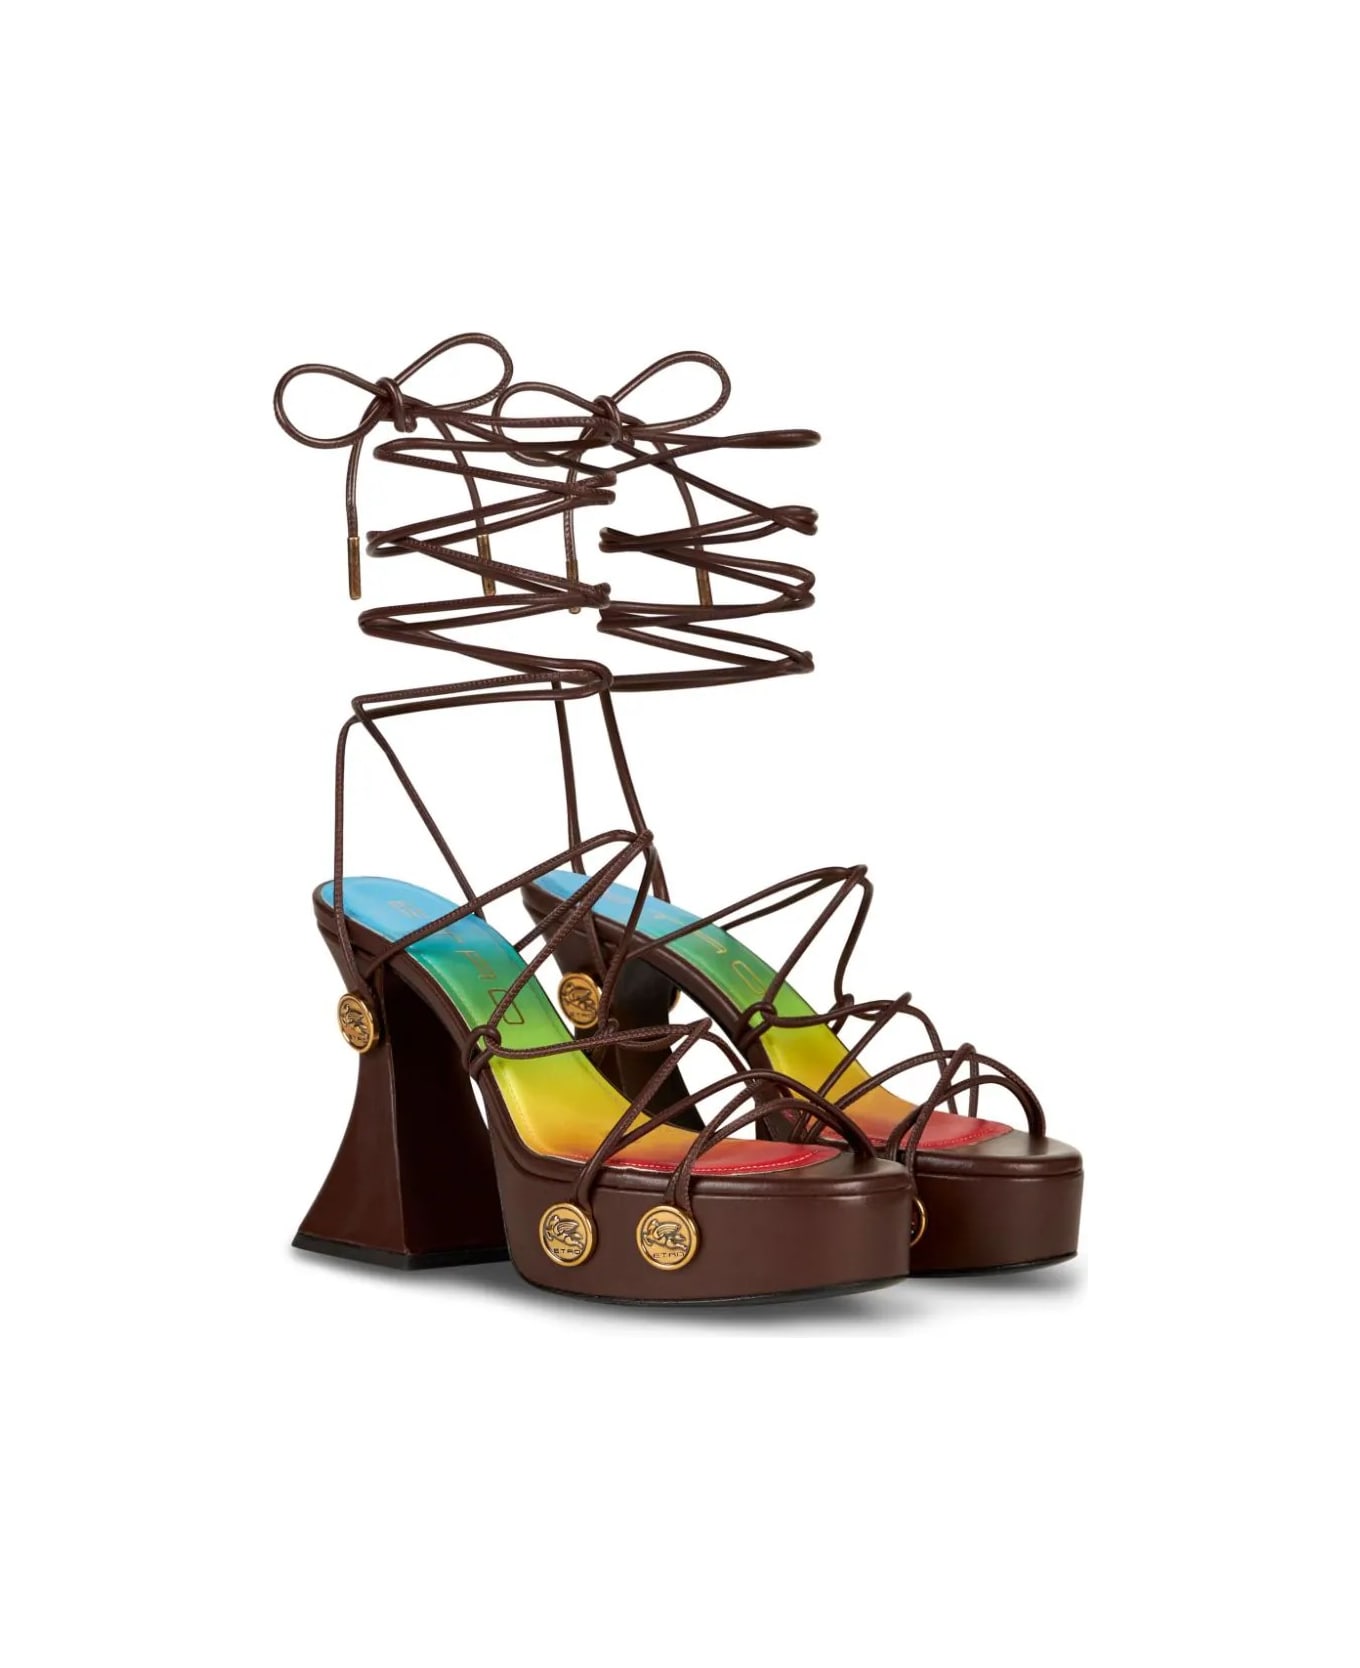 Etro Brown Platform Sandals With Straps And Studs - Brown サンダル